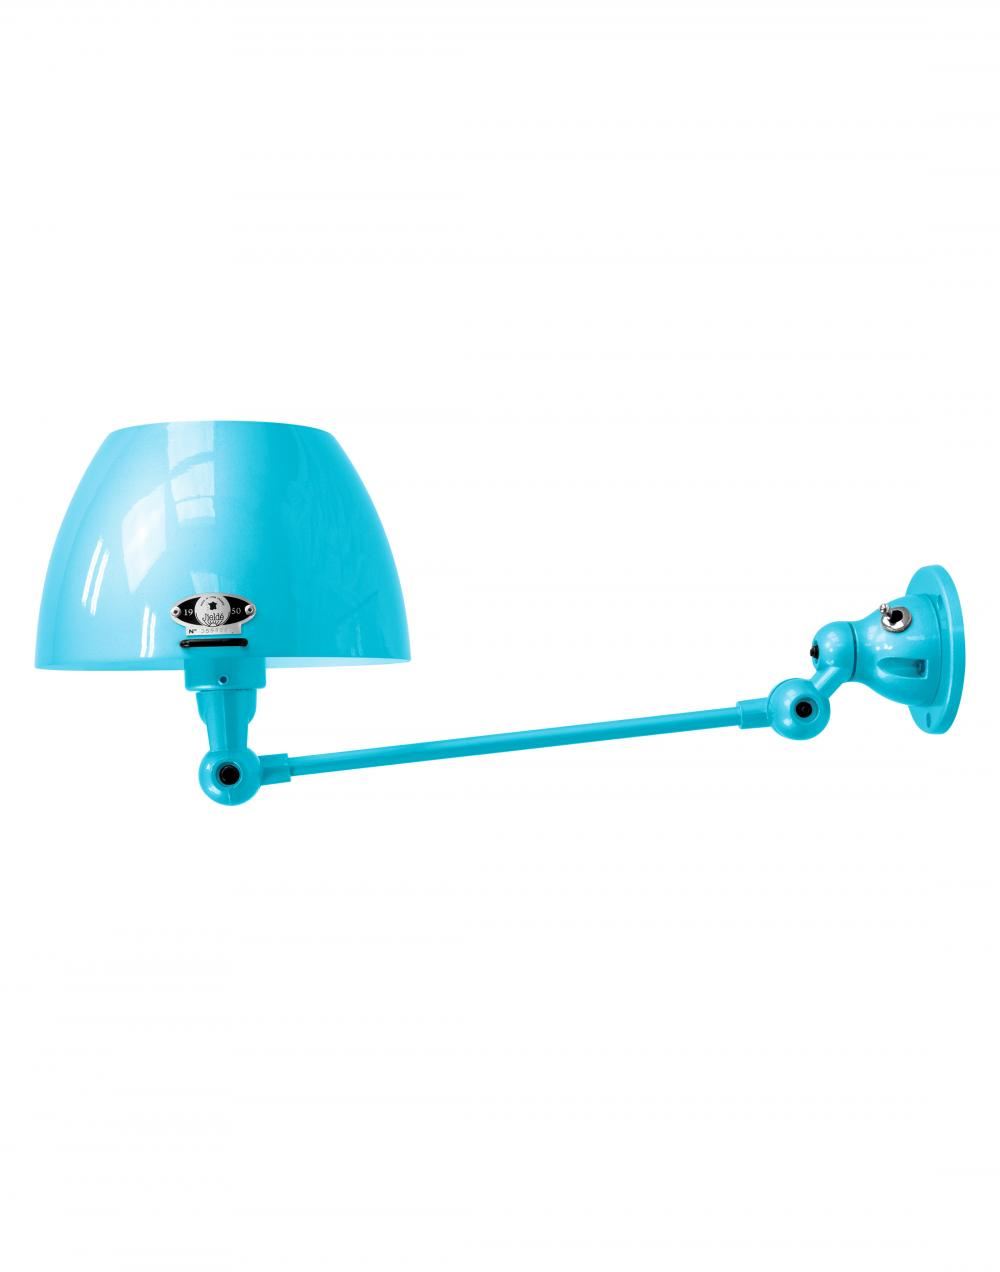 Jielde Aicler One Arm Adjustable Wall Light Curved Shade Pastel Blue Gloss Integral Switch On Base